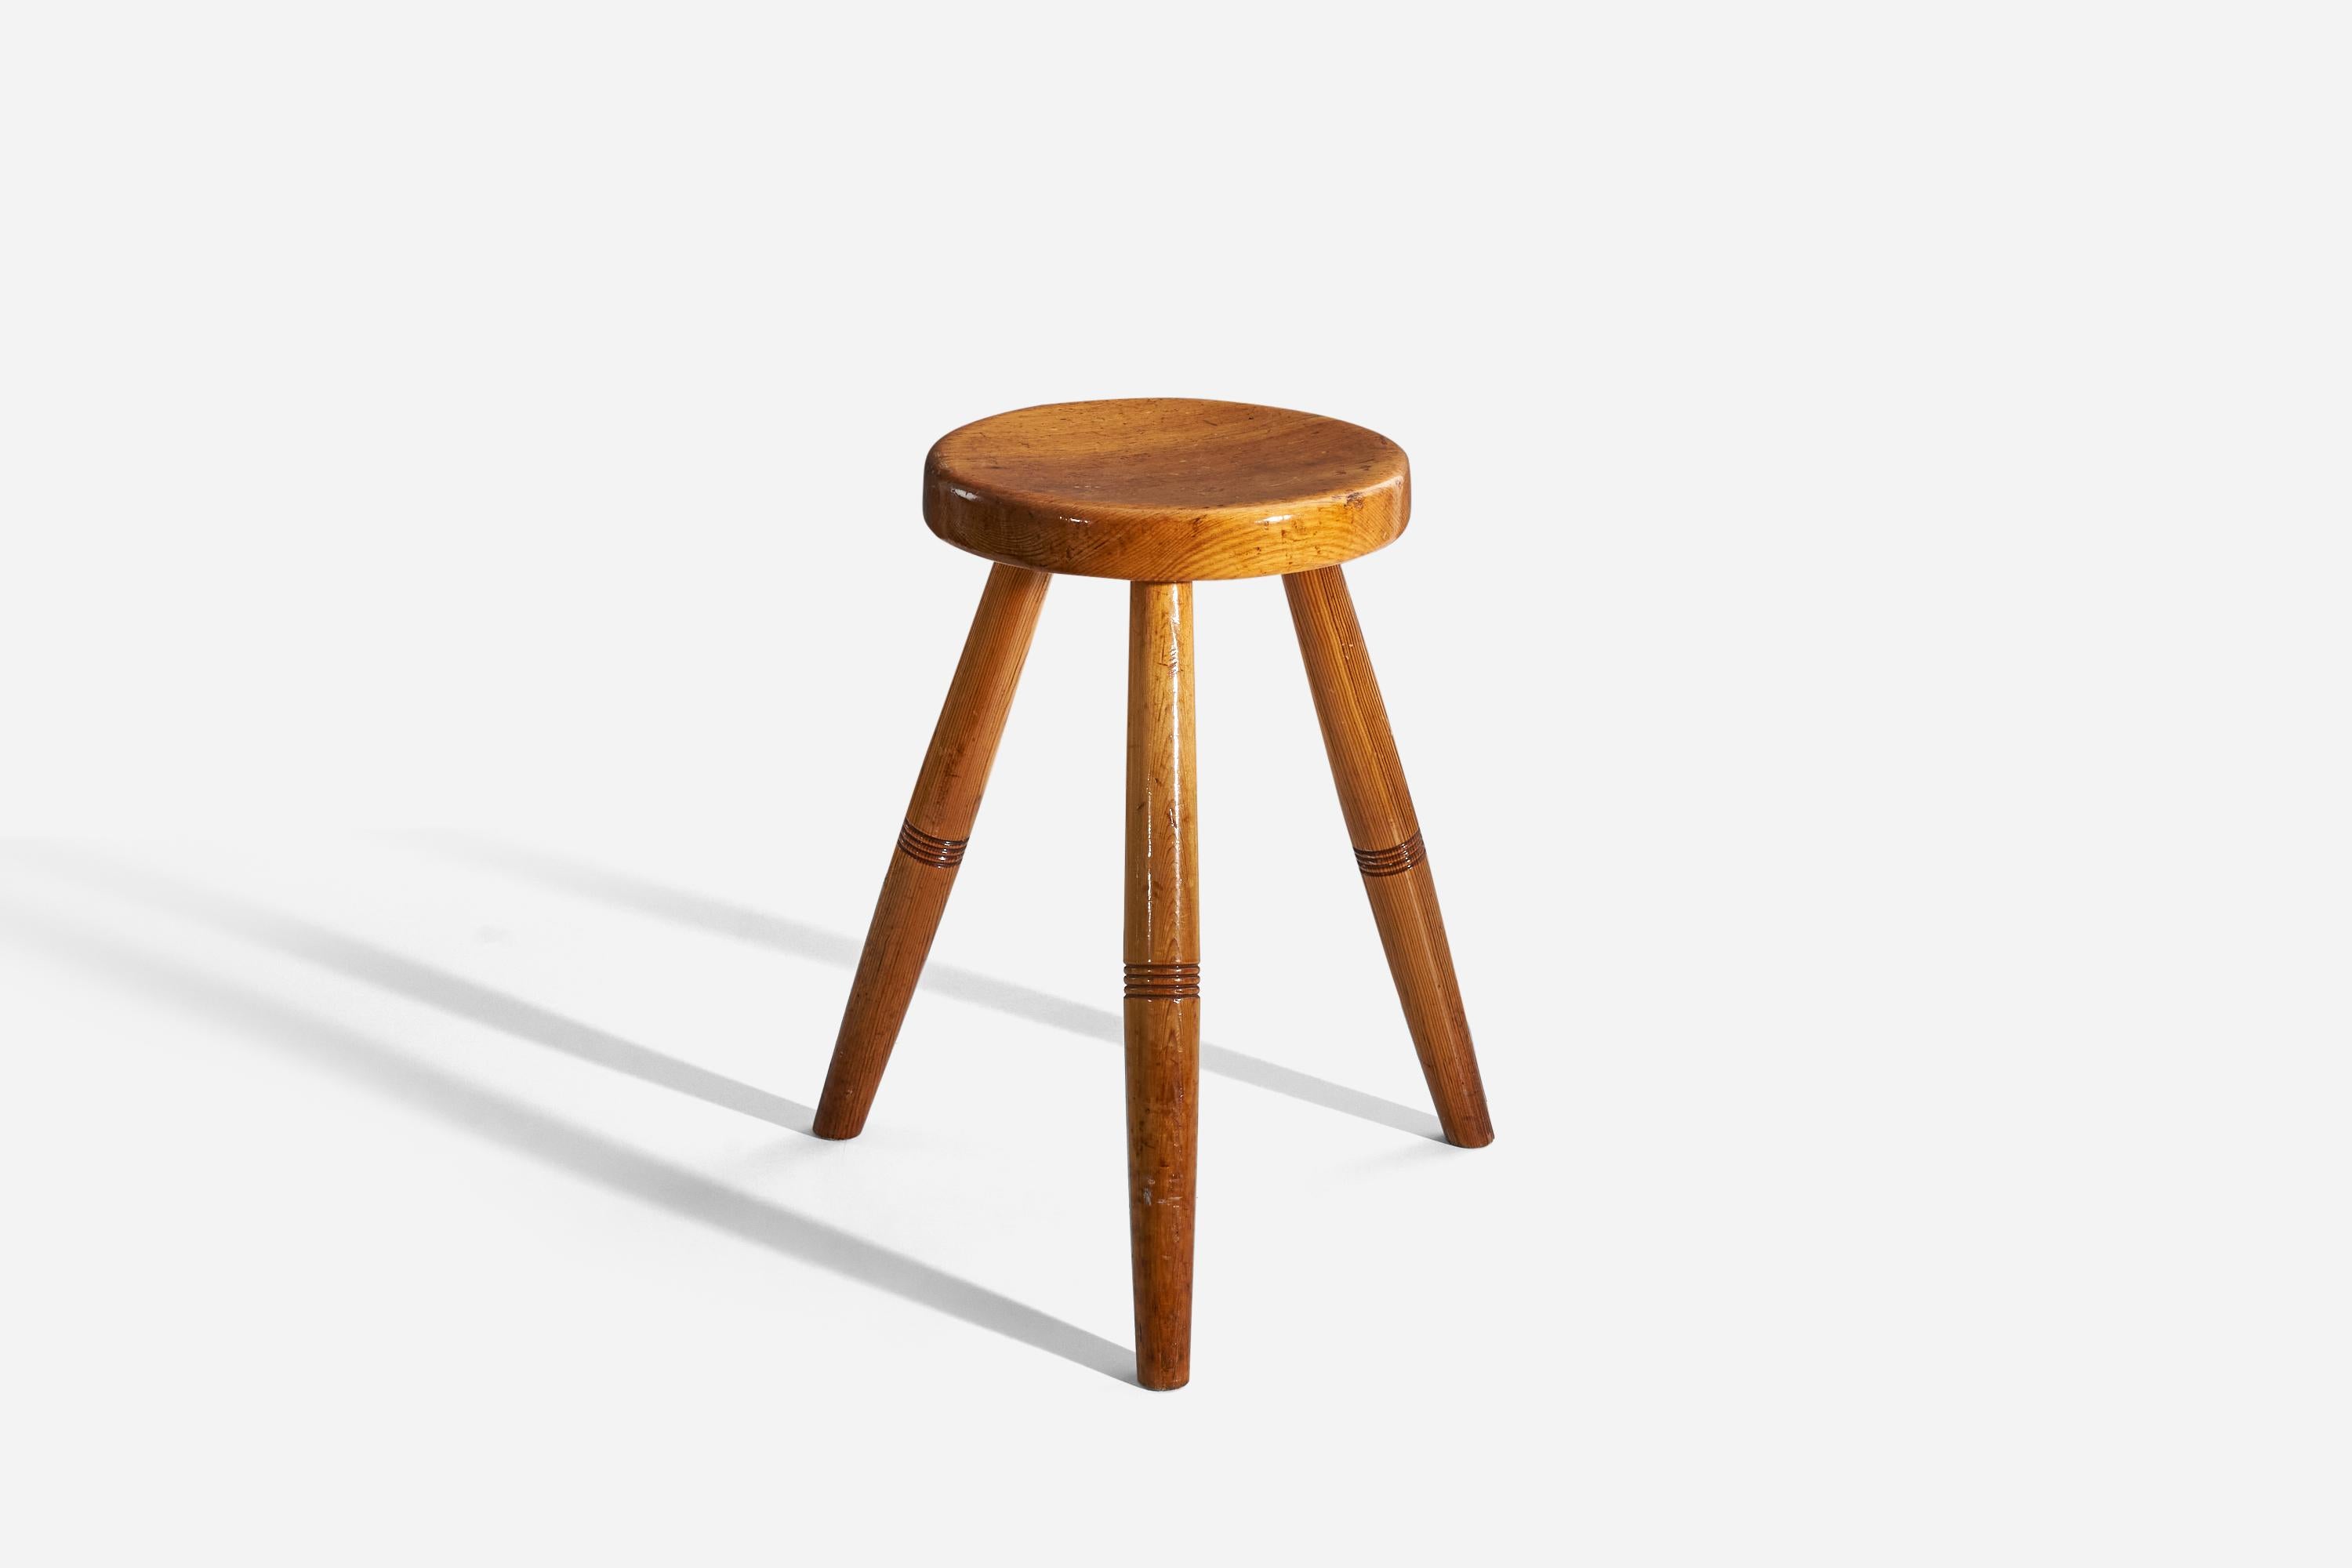 A solid pine wood stool designed and produced in Sweden, c. 1970s.